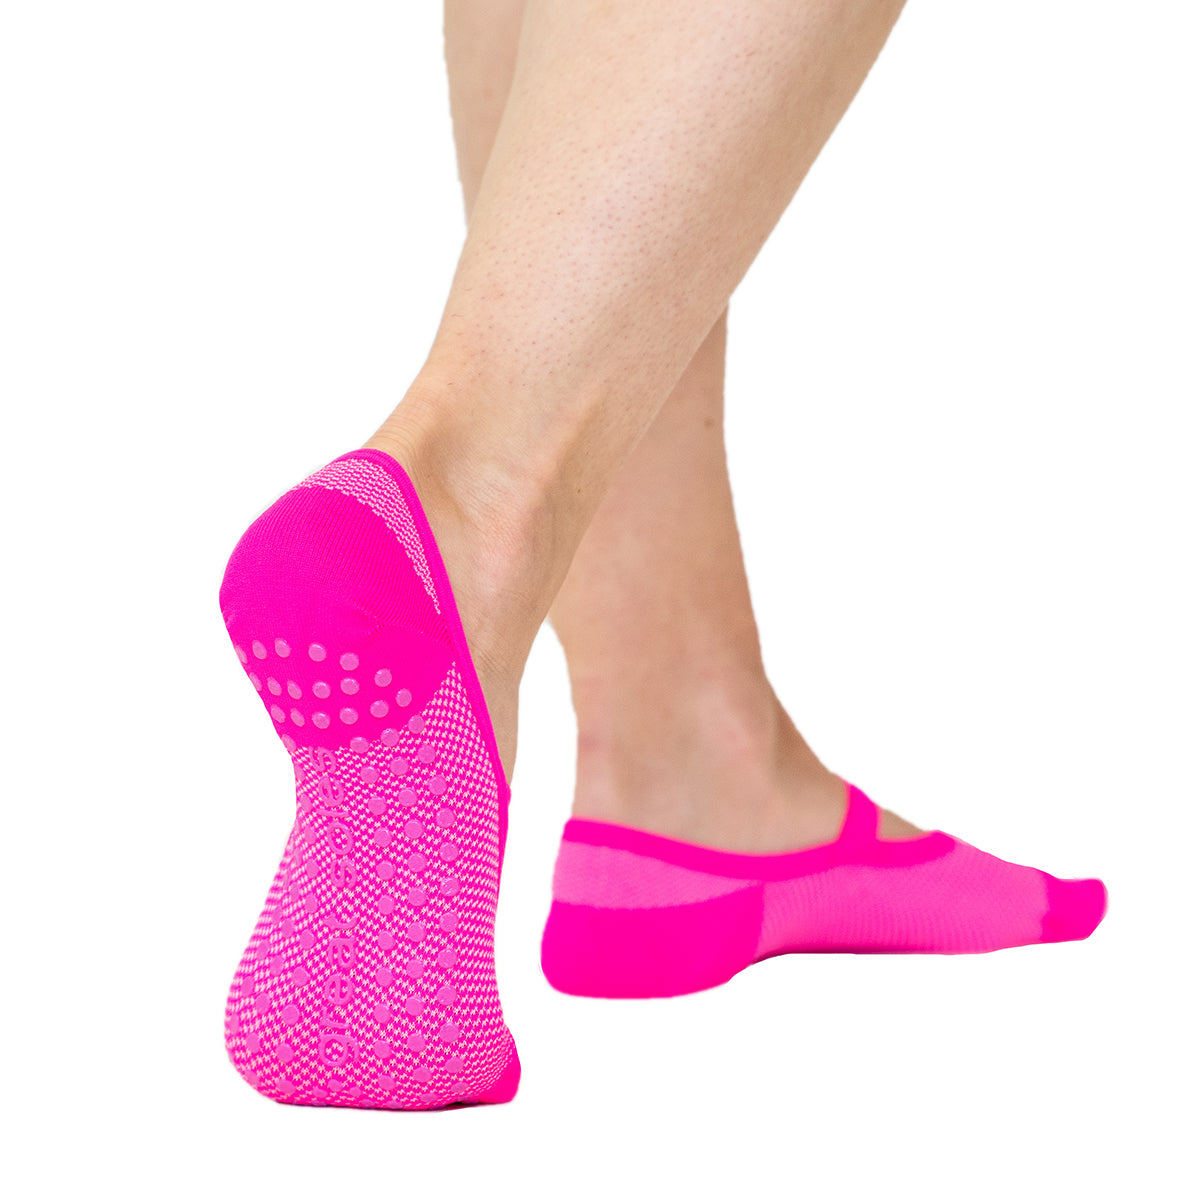 Breathable Neon Pink Mesh Grip Sock for Pilates Barre Yoga Dance Workout -  Great Soles